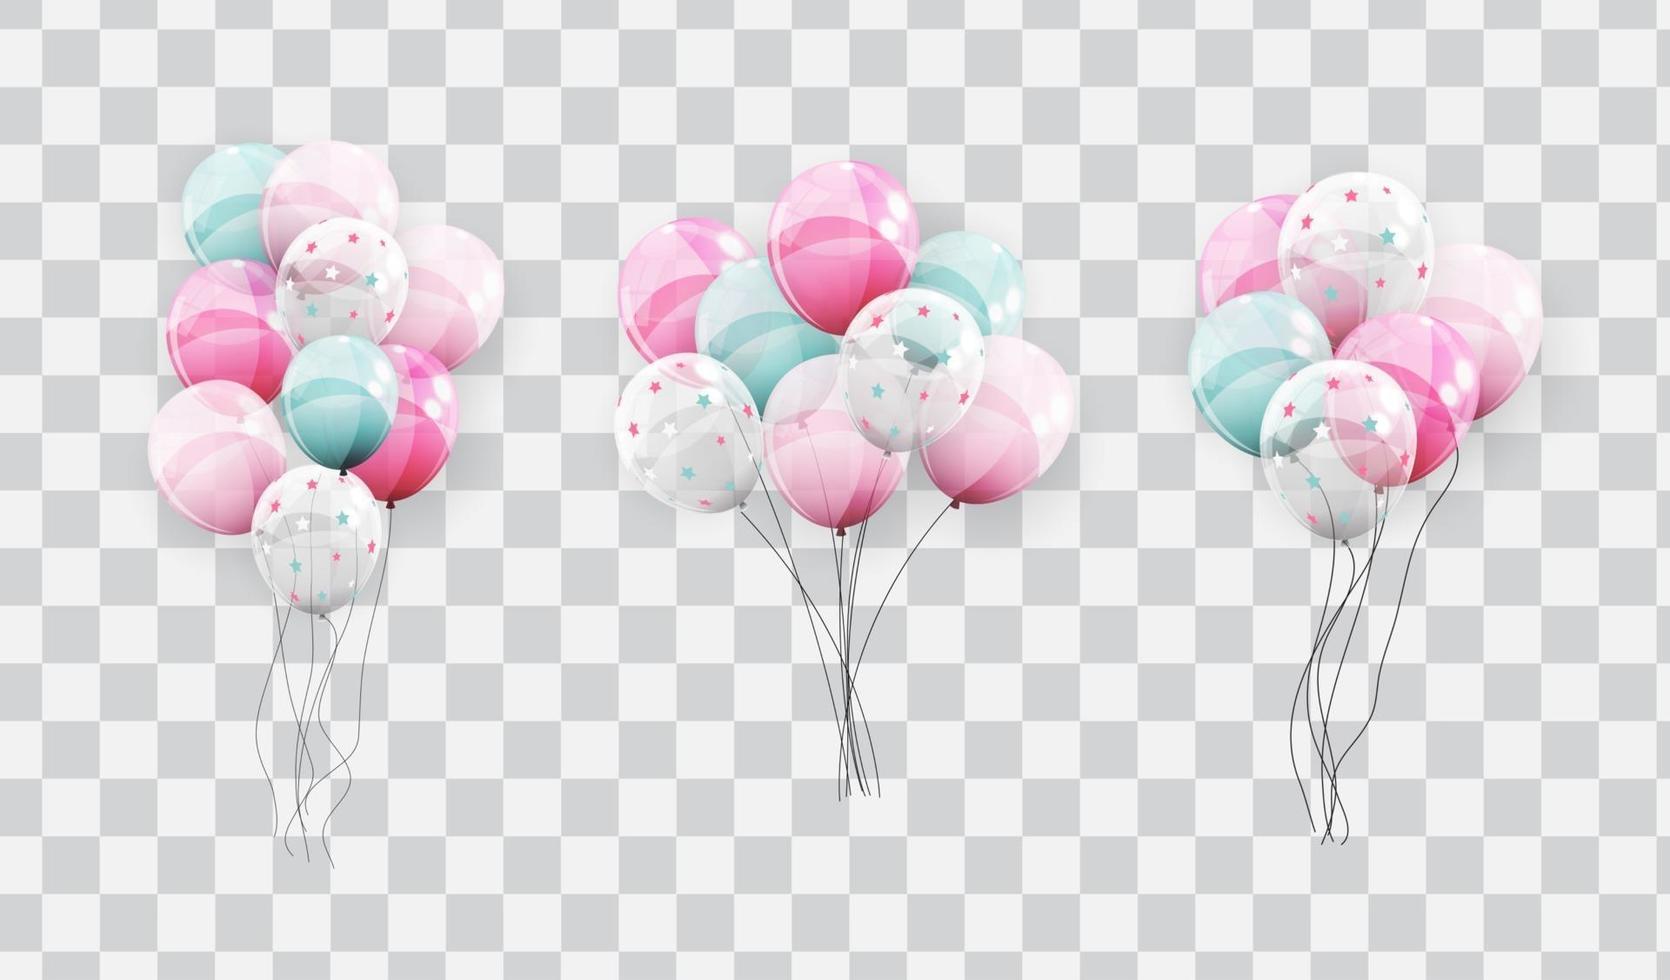 Balloons with Hearts isolated on transparent background Vector Illustratio